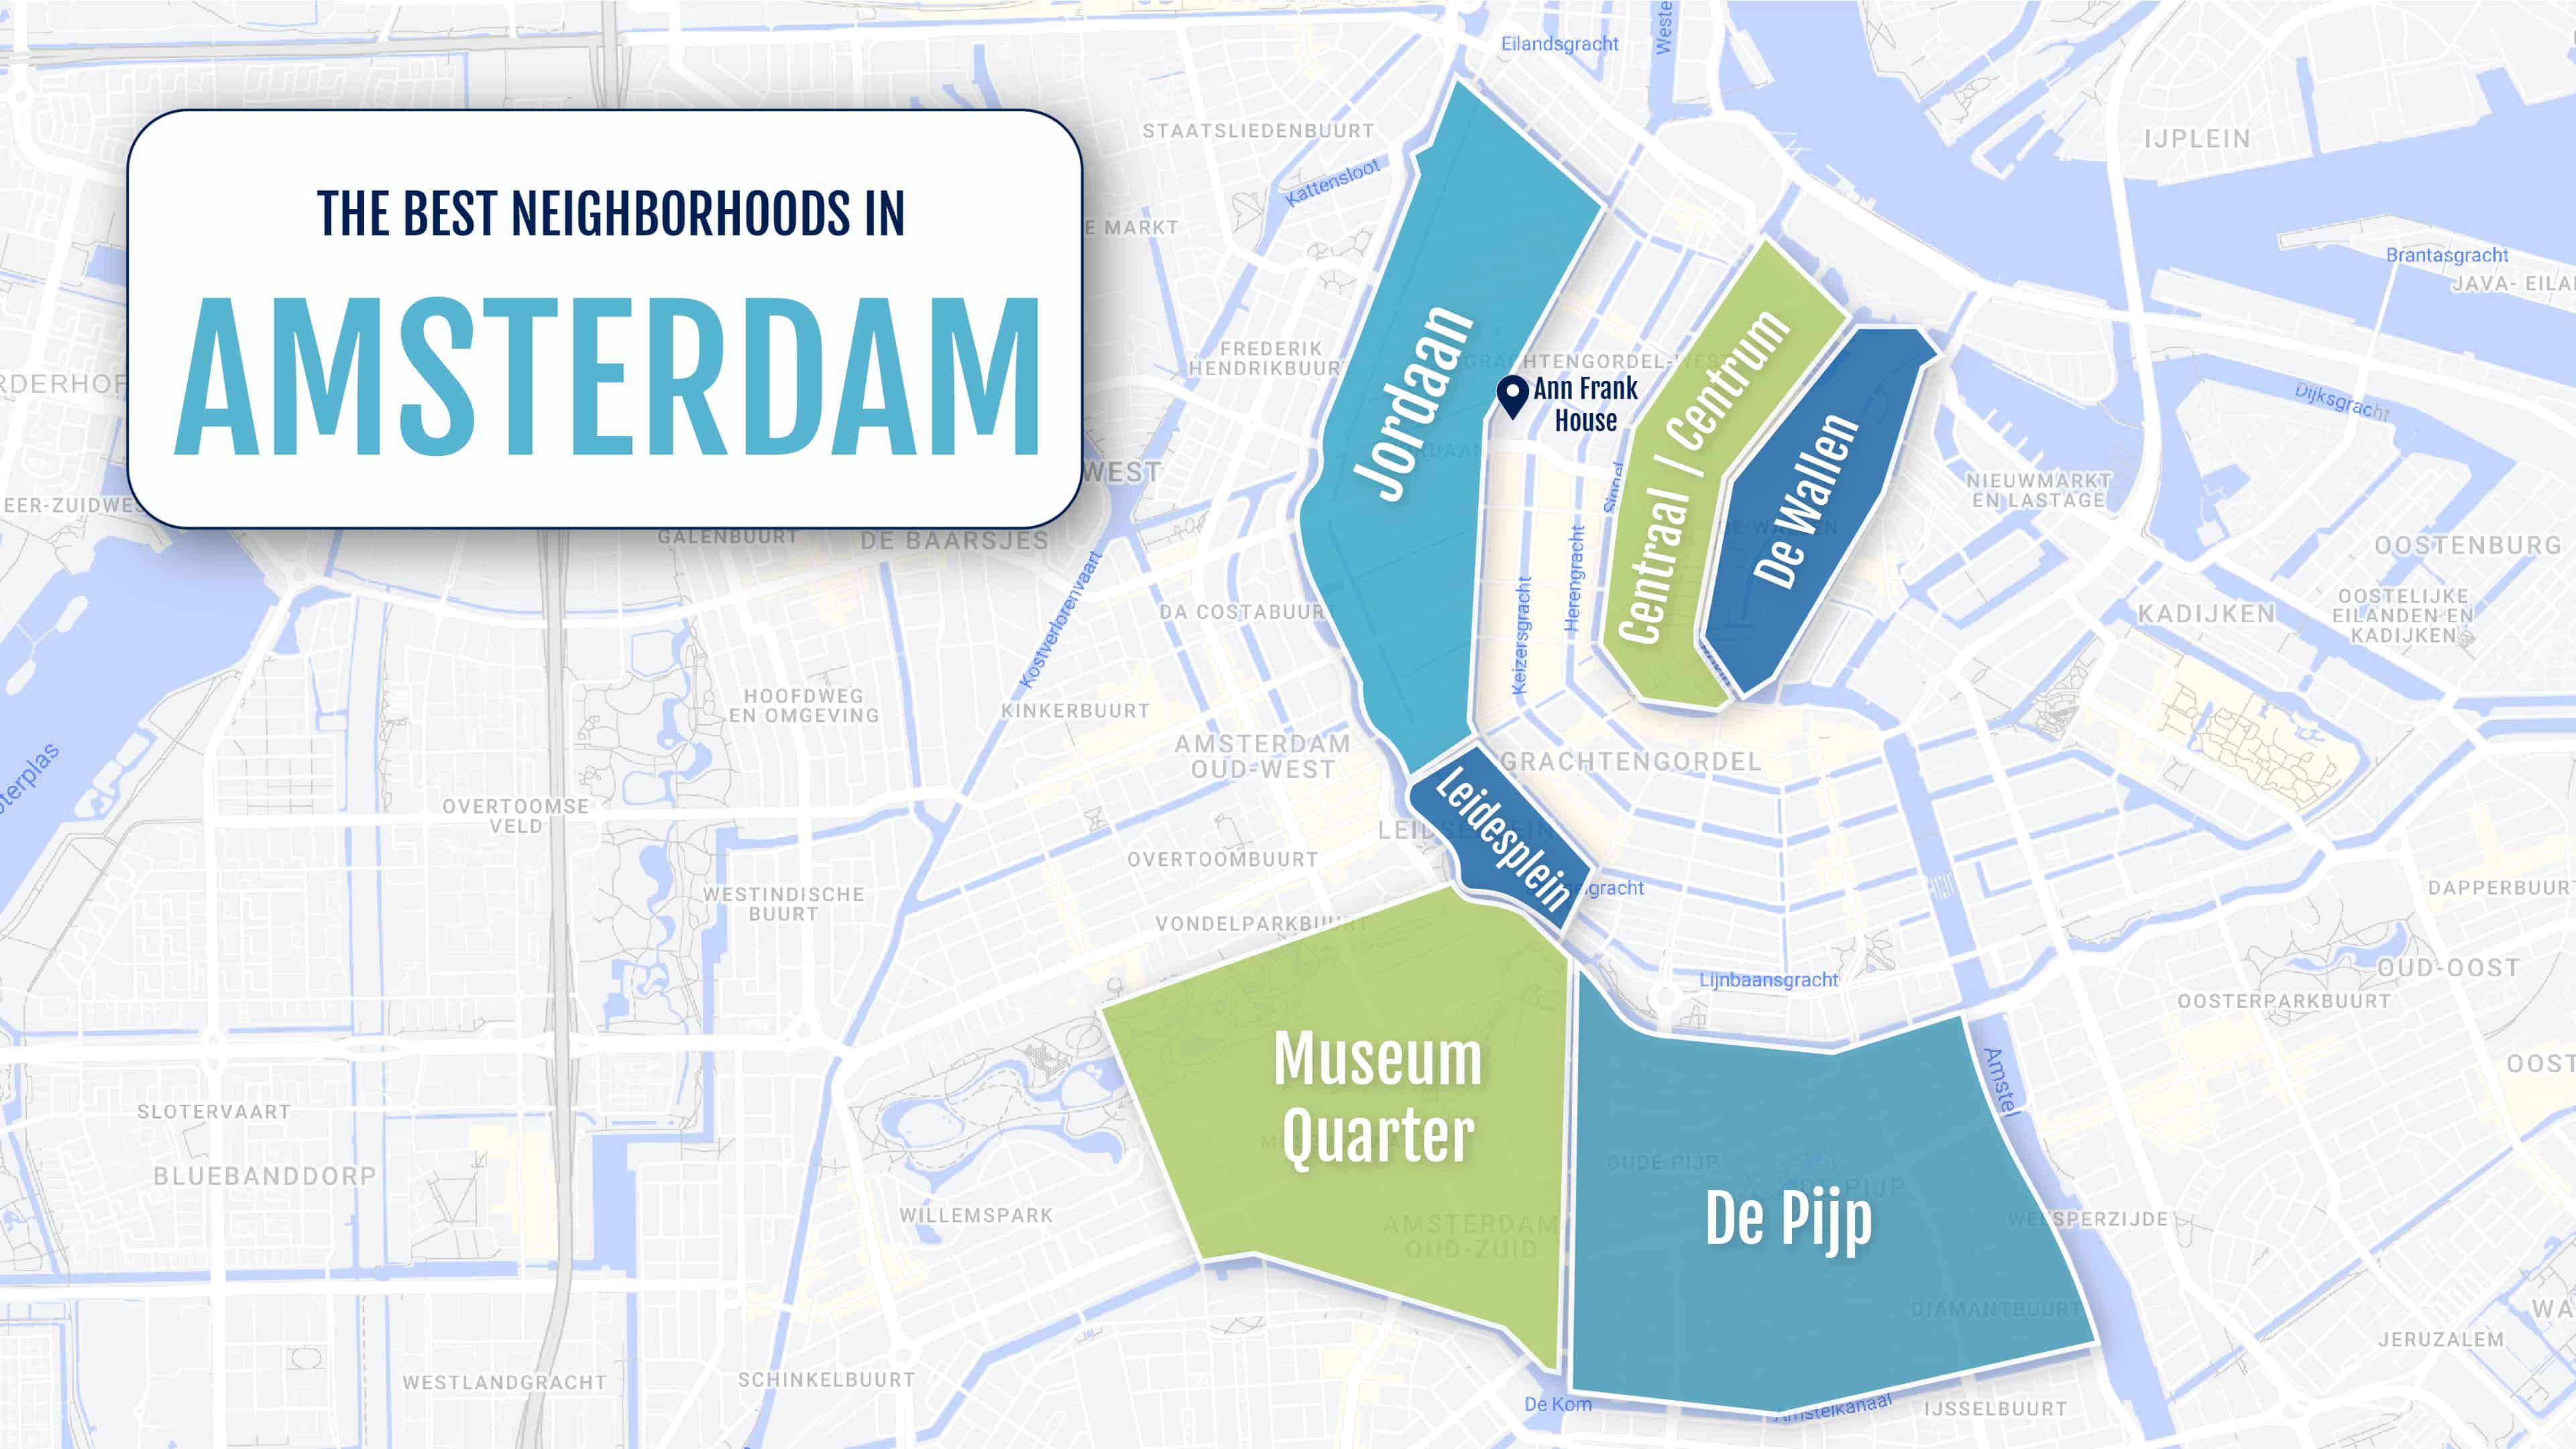 A colorful map of the neighborhoods in Amsterdam, Netherlands